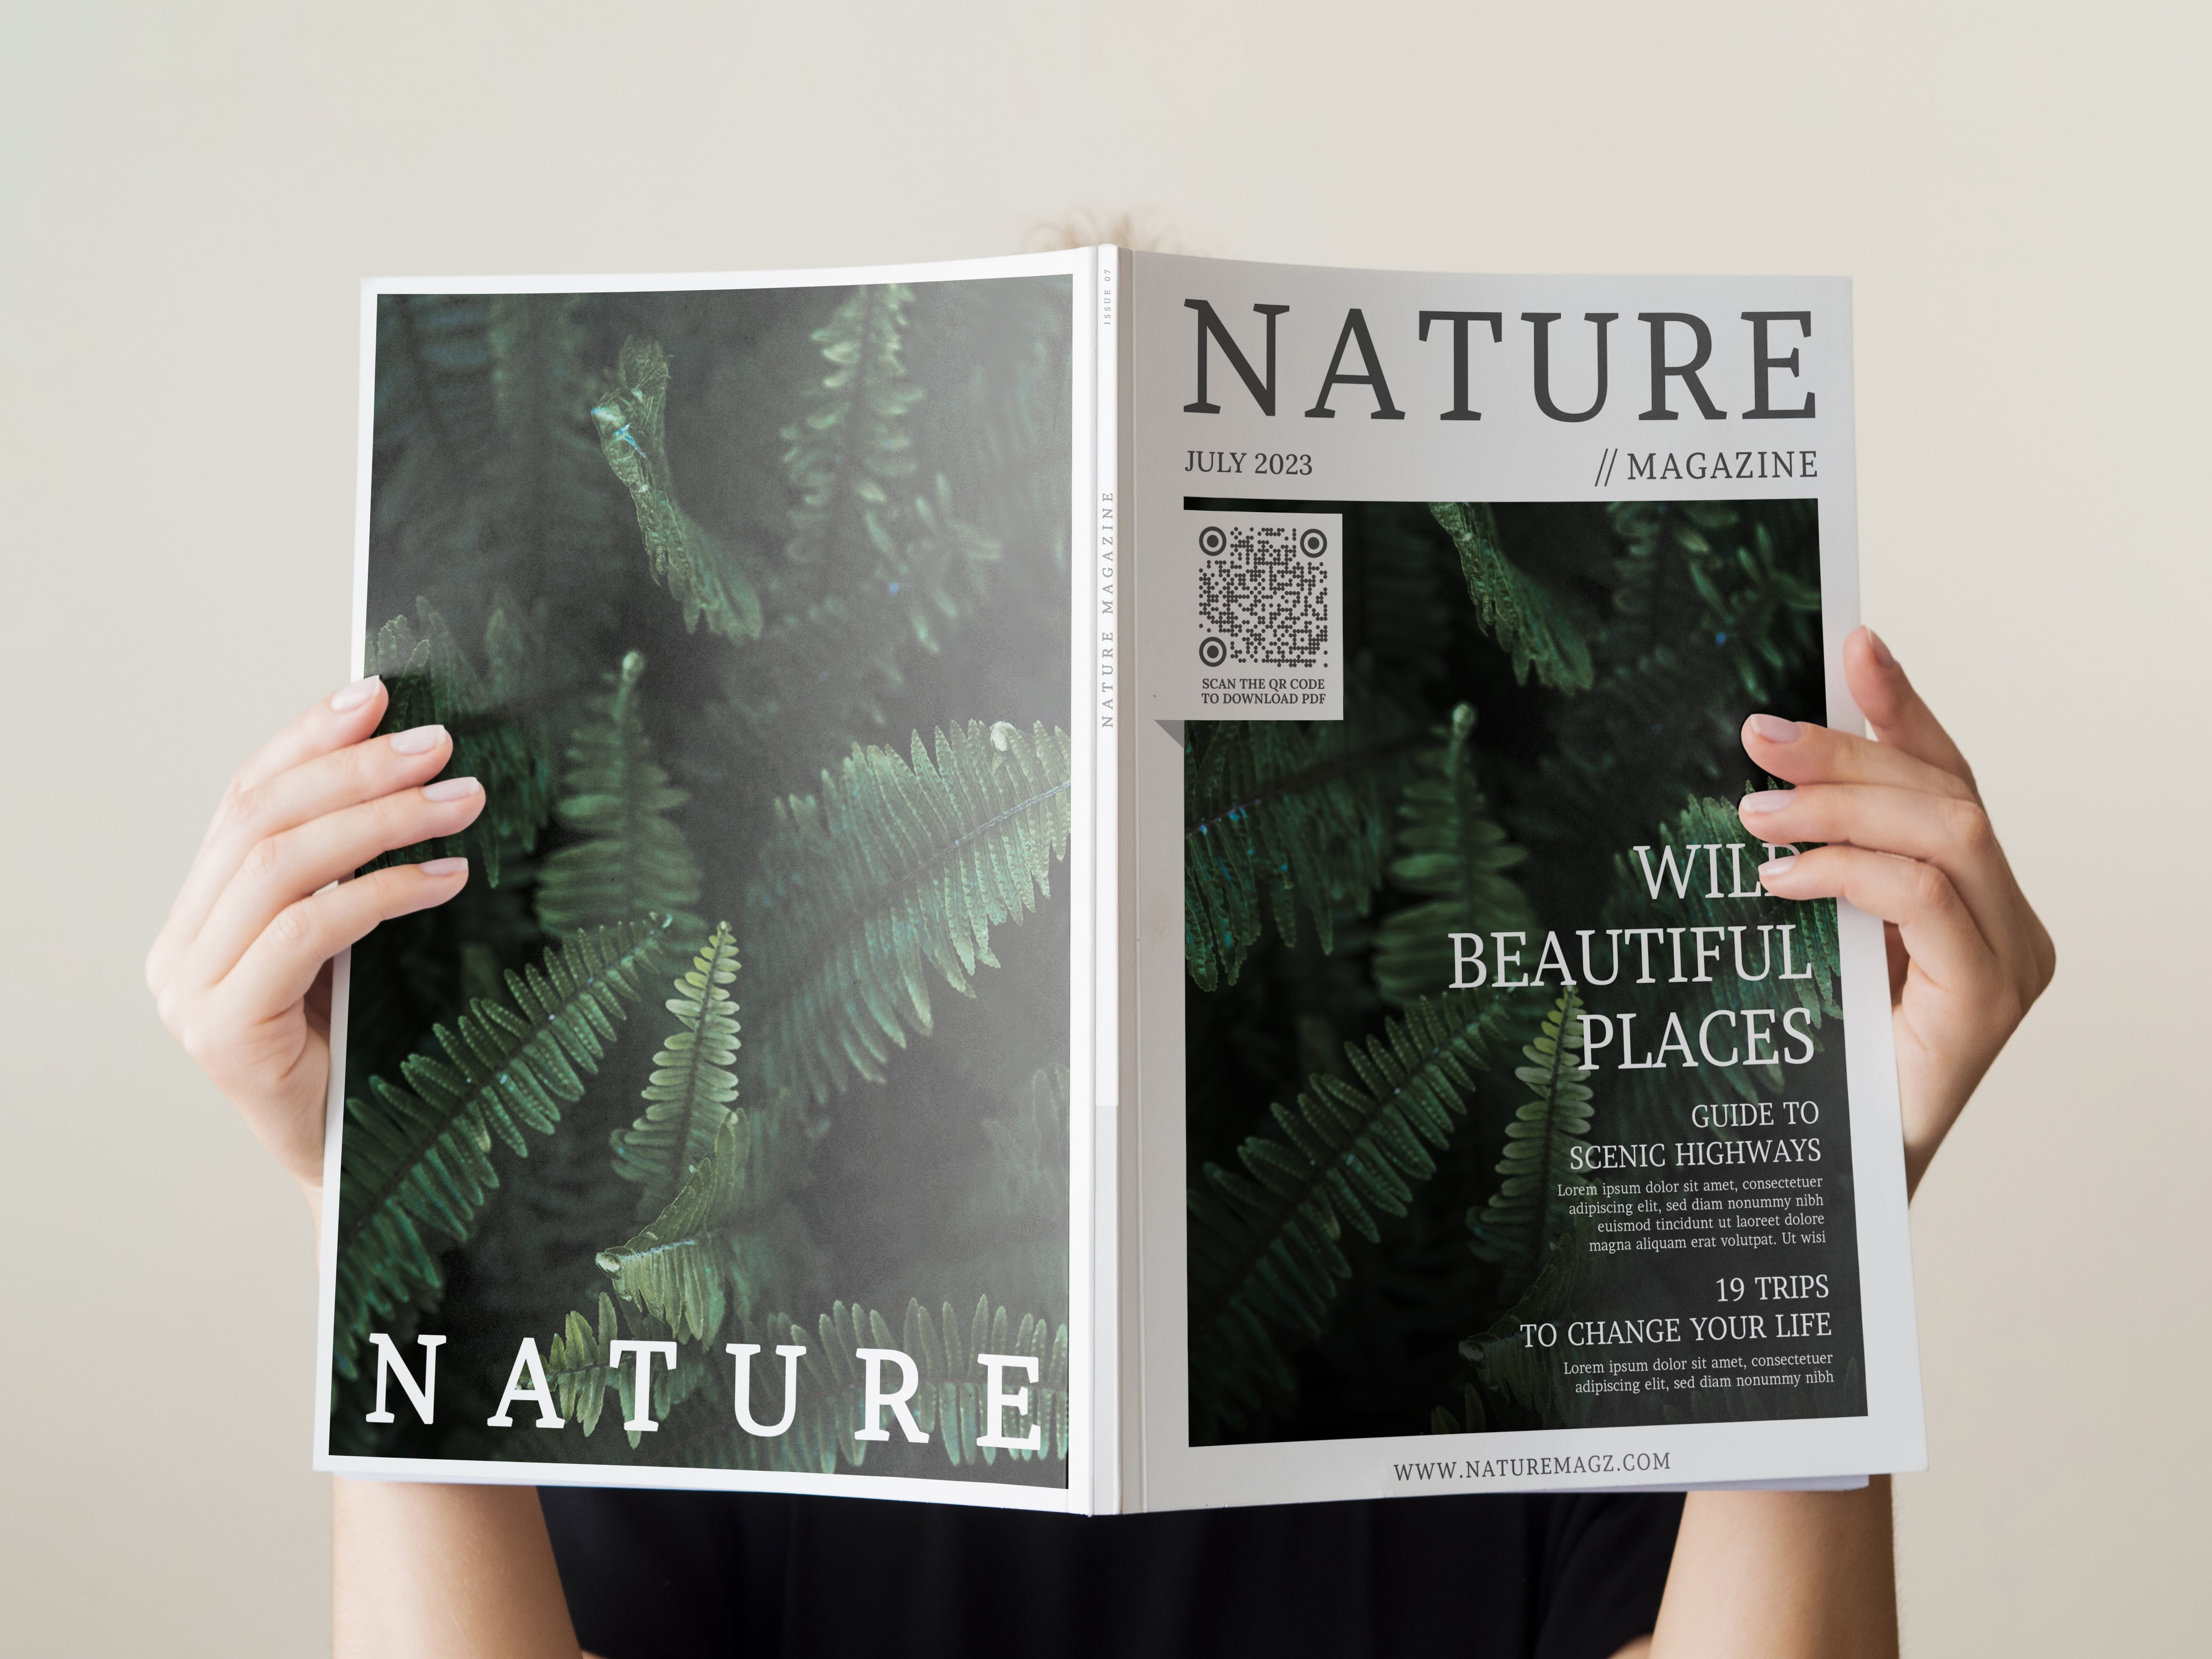 Magazines Enhanced with Interactive QR Codes